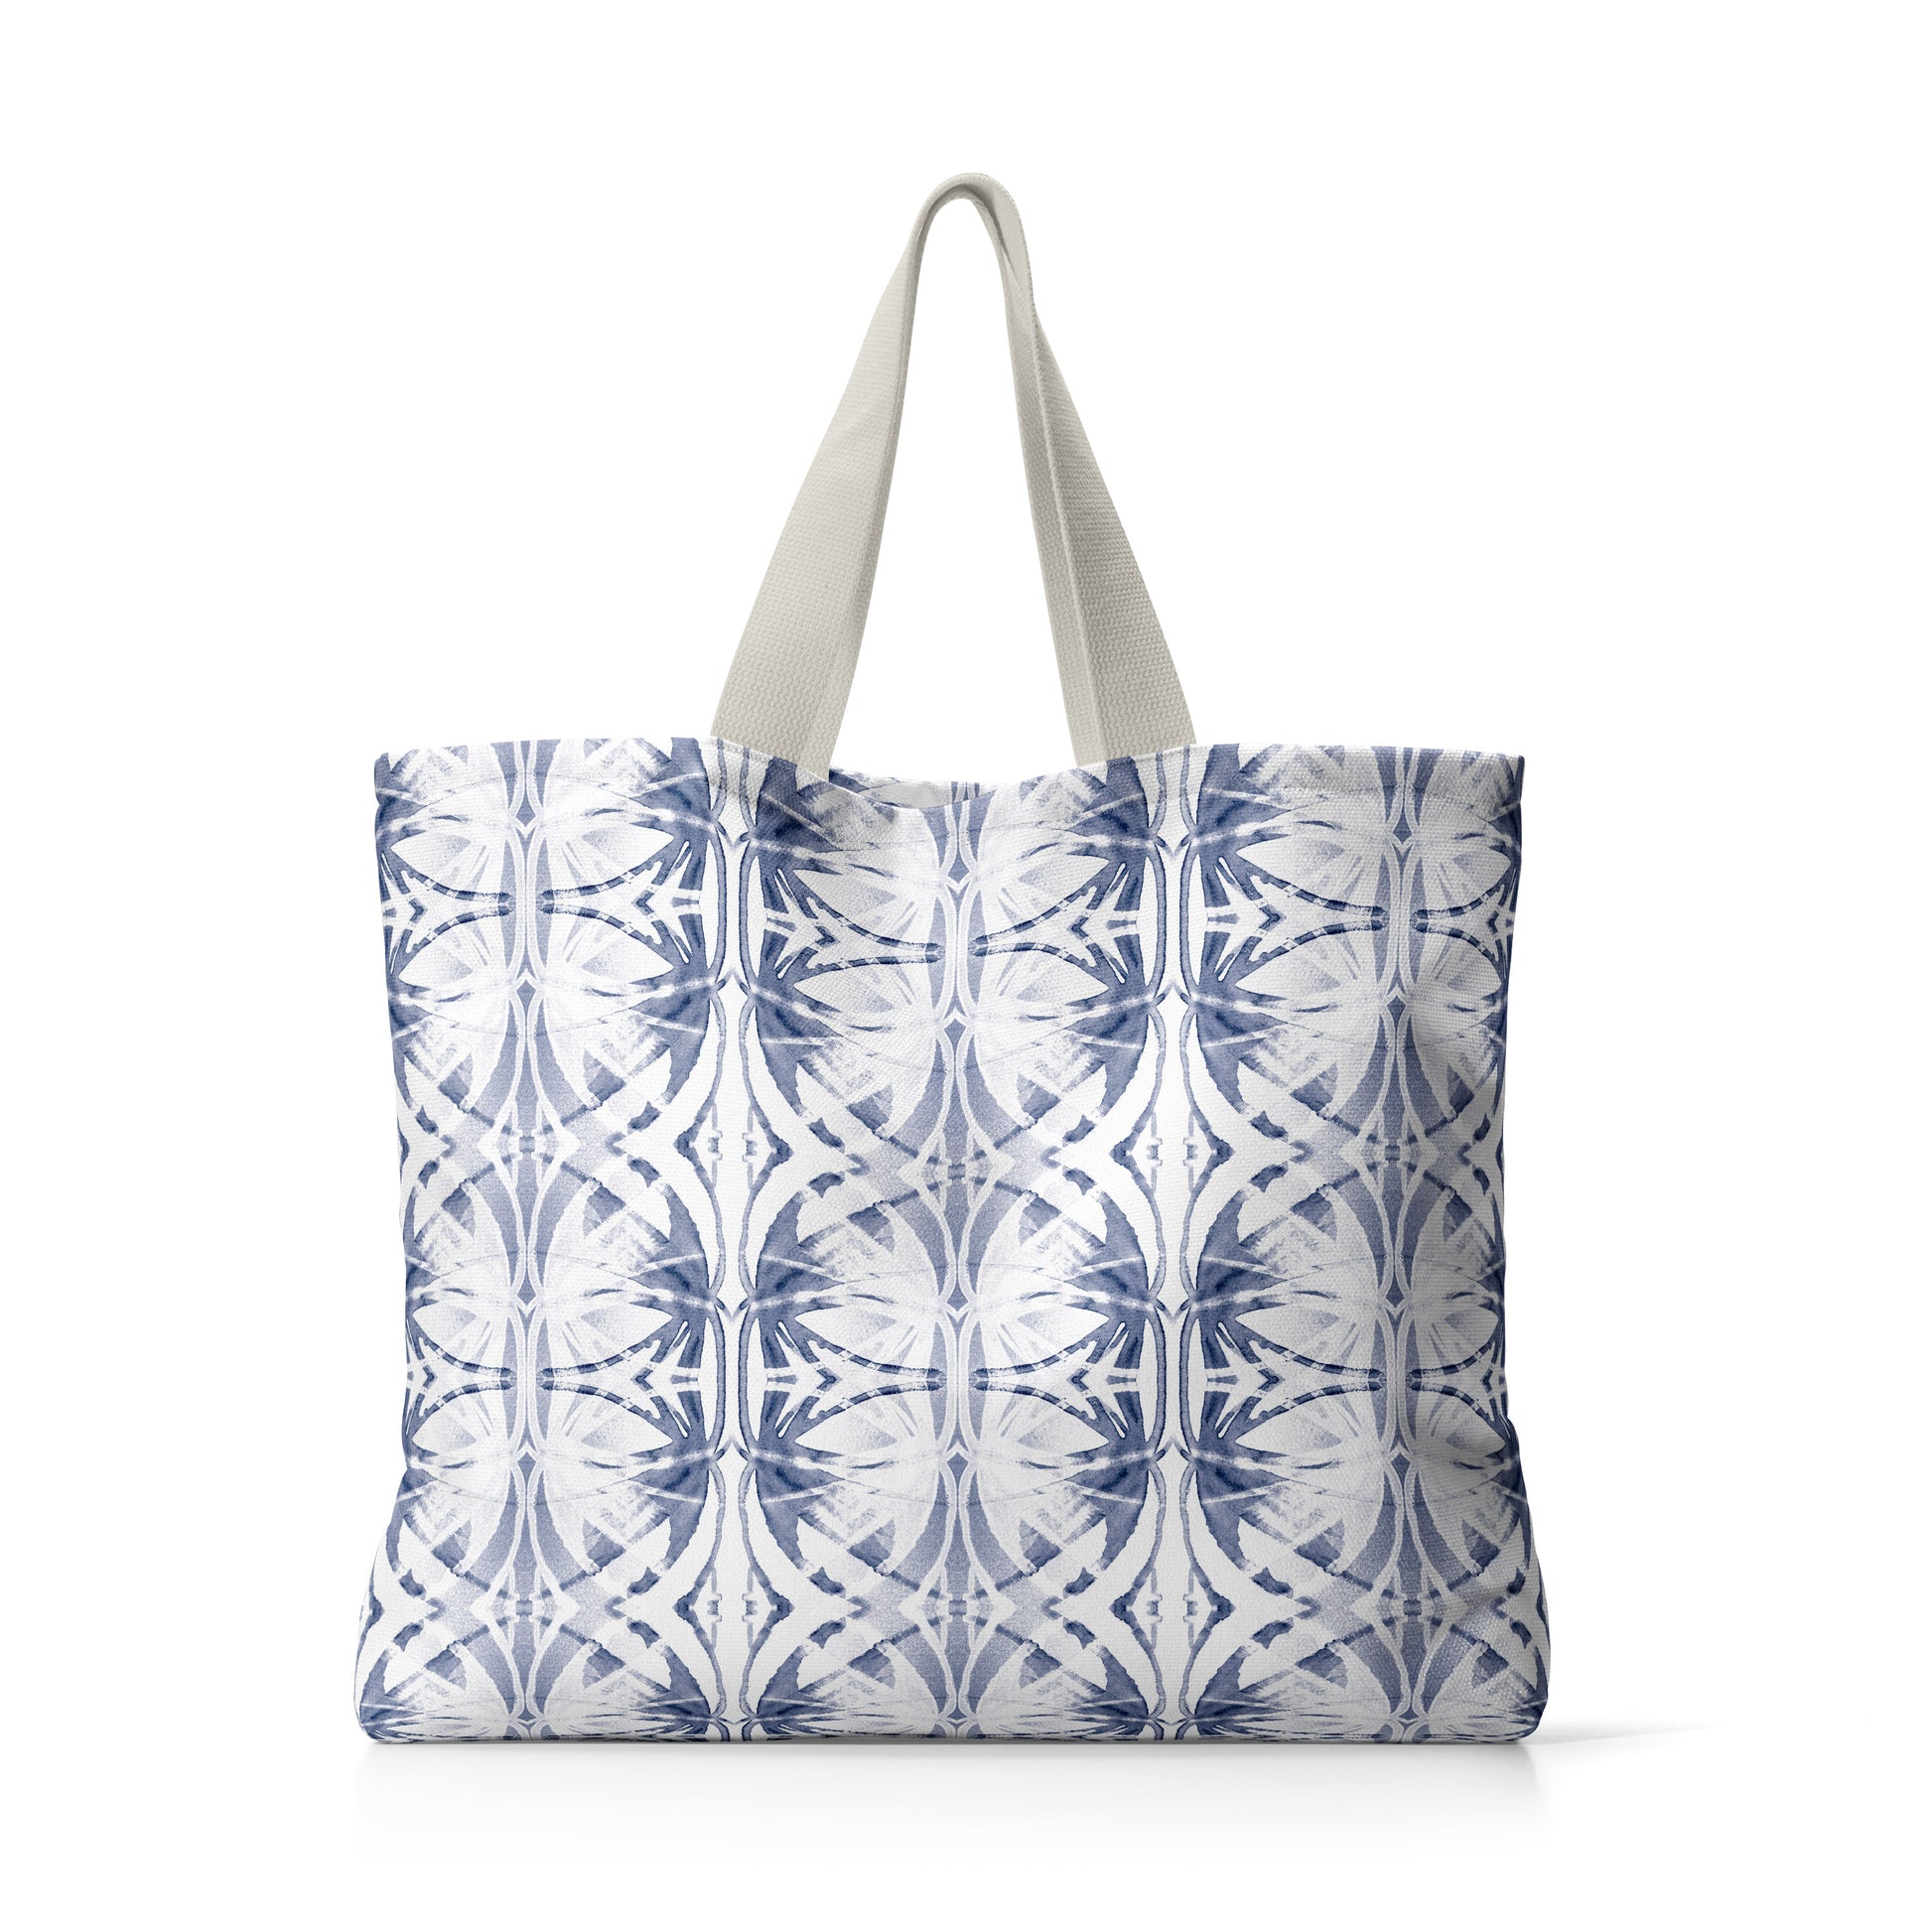 Oversized canvas tote on white background, featuring a blue and white abstract pattern